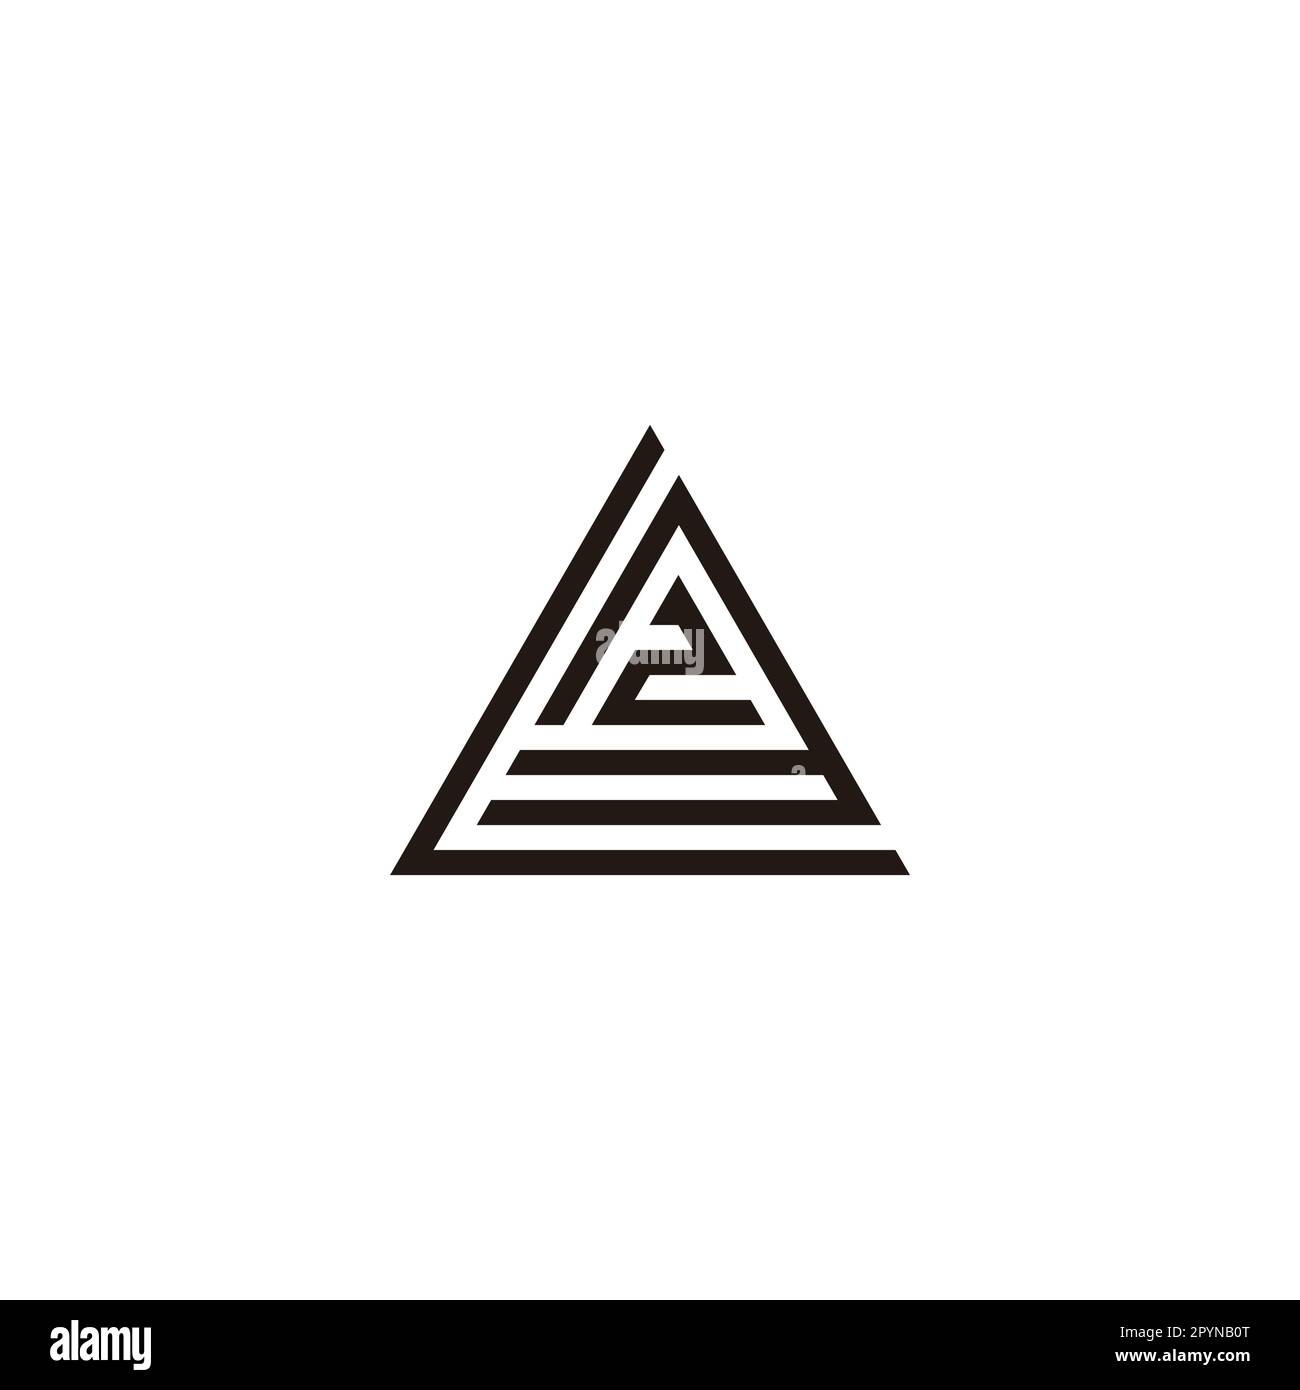 Letter L, number 3 and 2 triangle geometric symbol simple logo vector ...